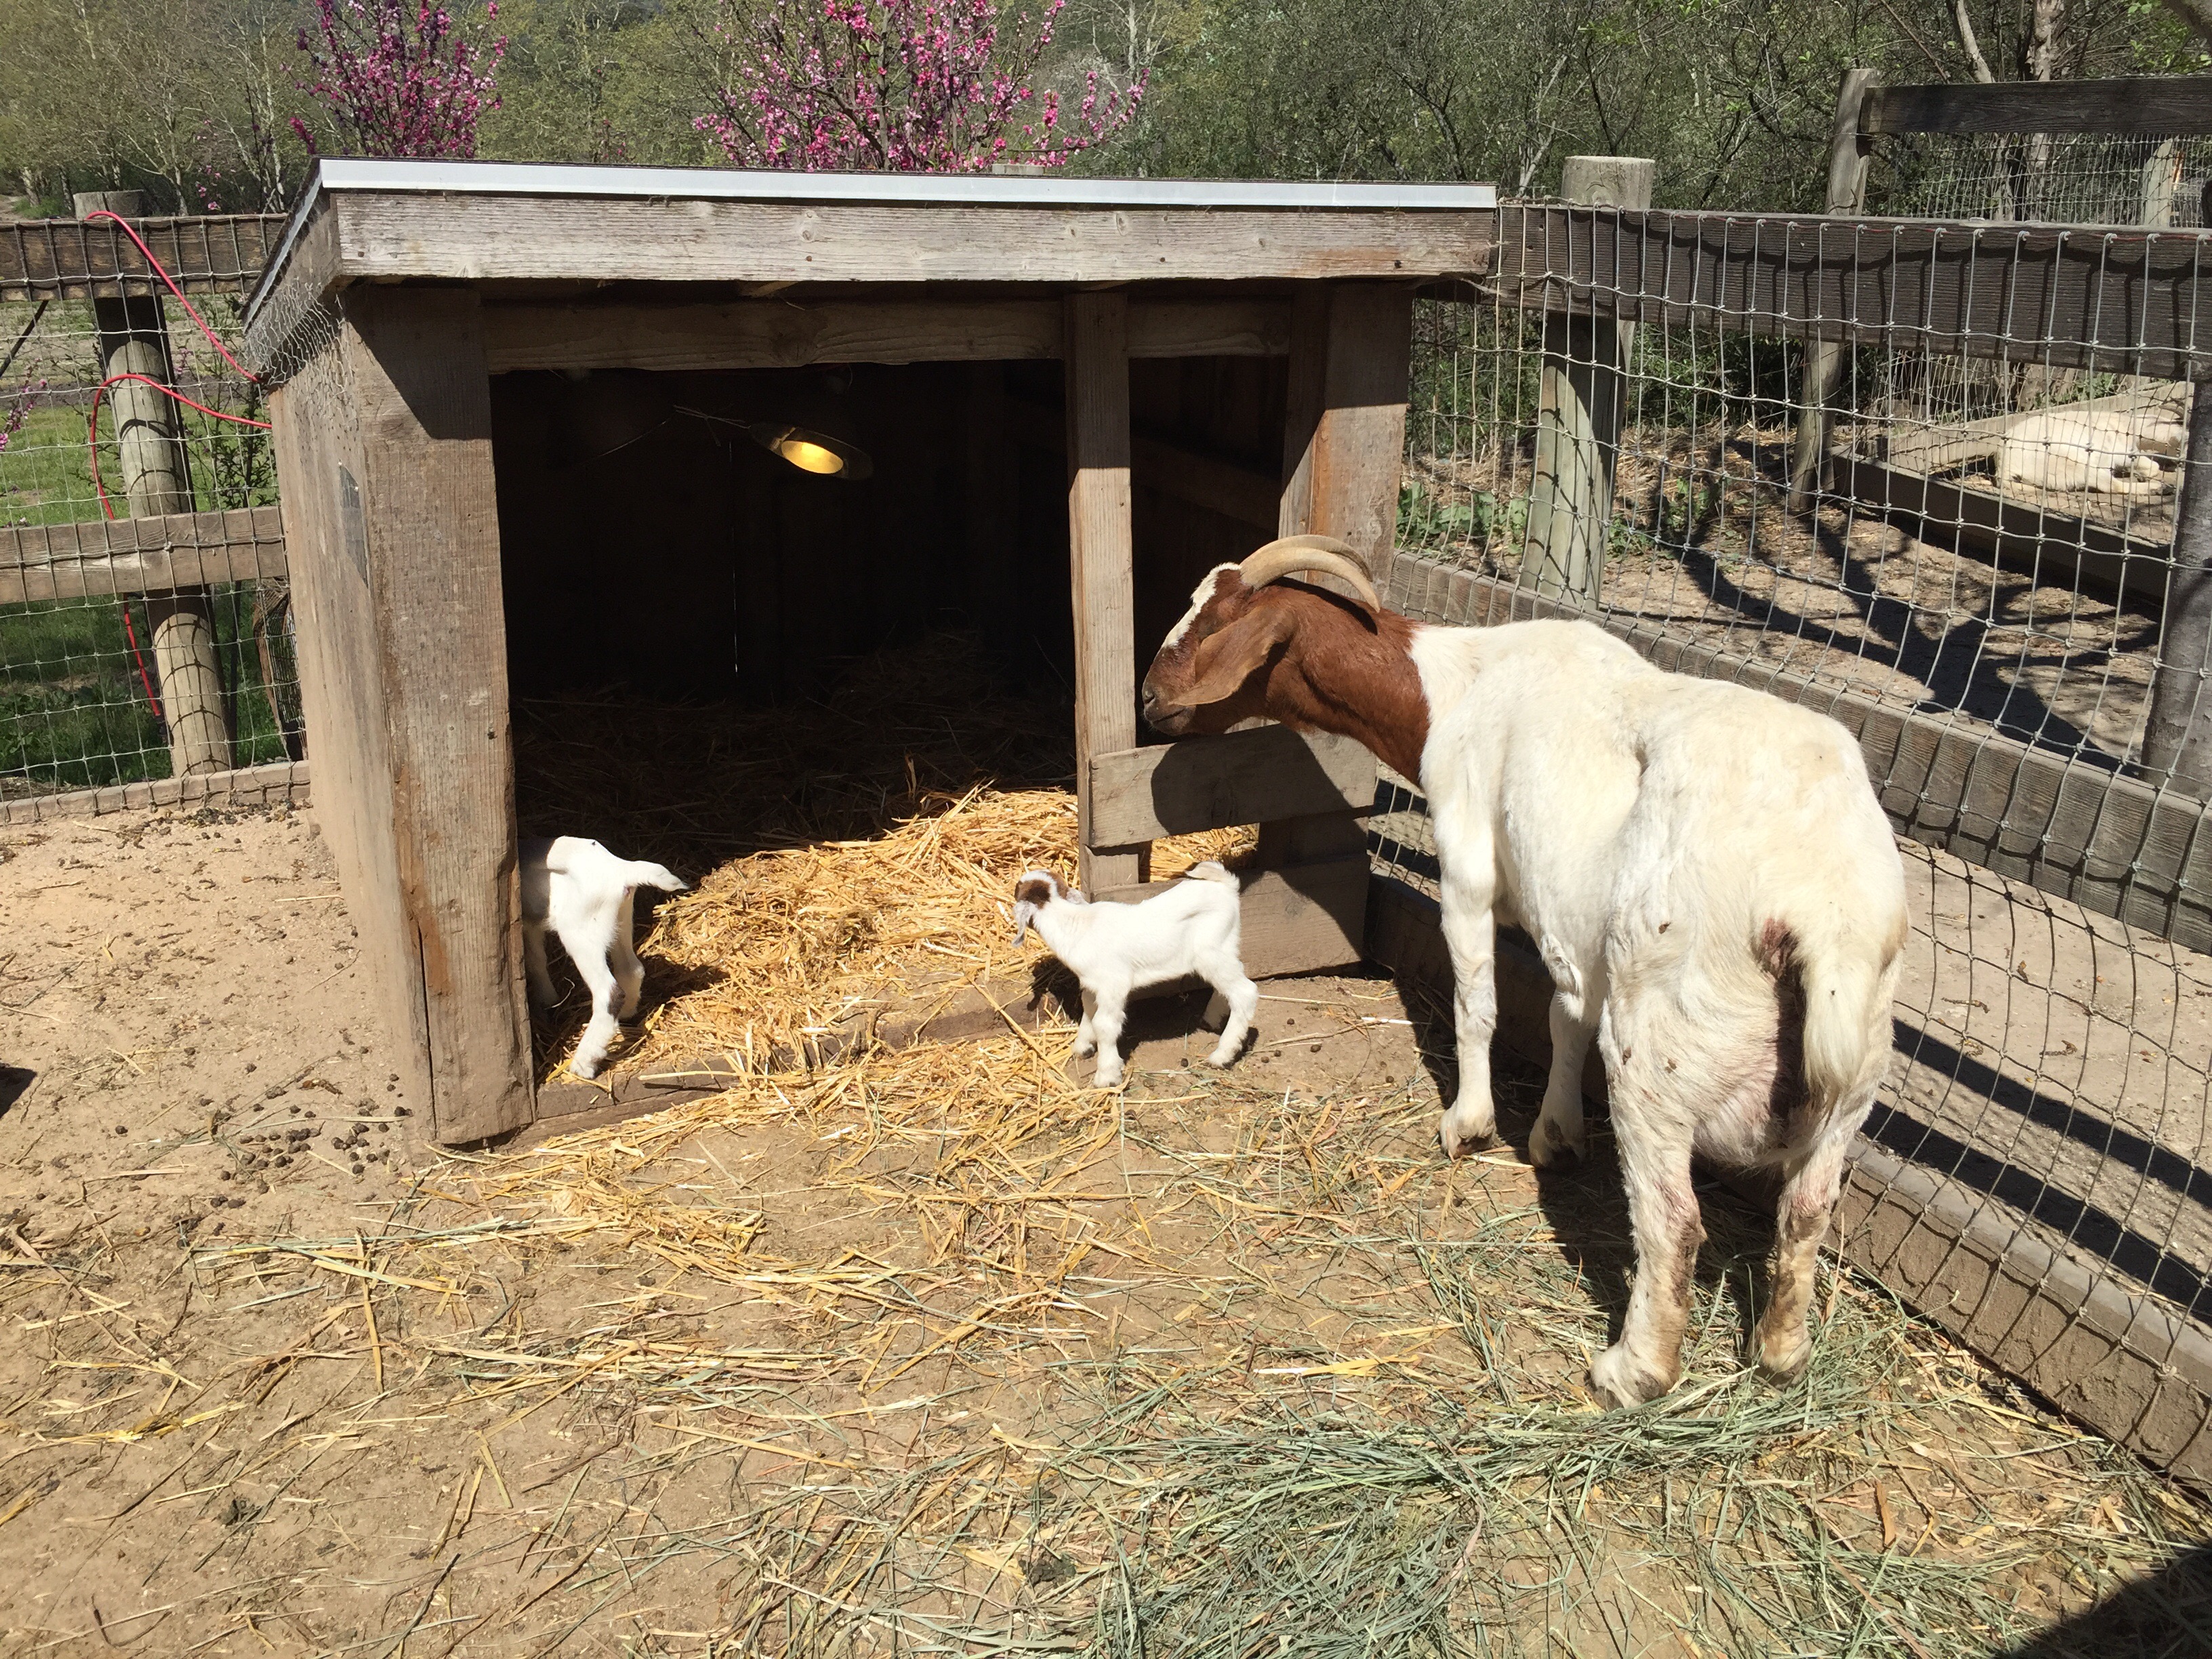 Two newborn baby goats pictured with their mother at Avila Valley Barn in San Luis Obispo California.